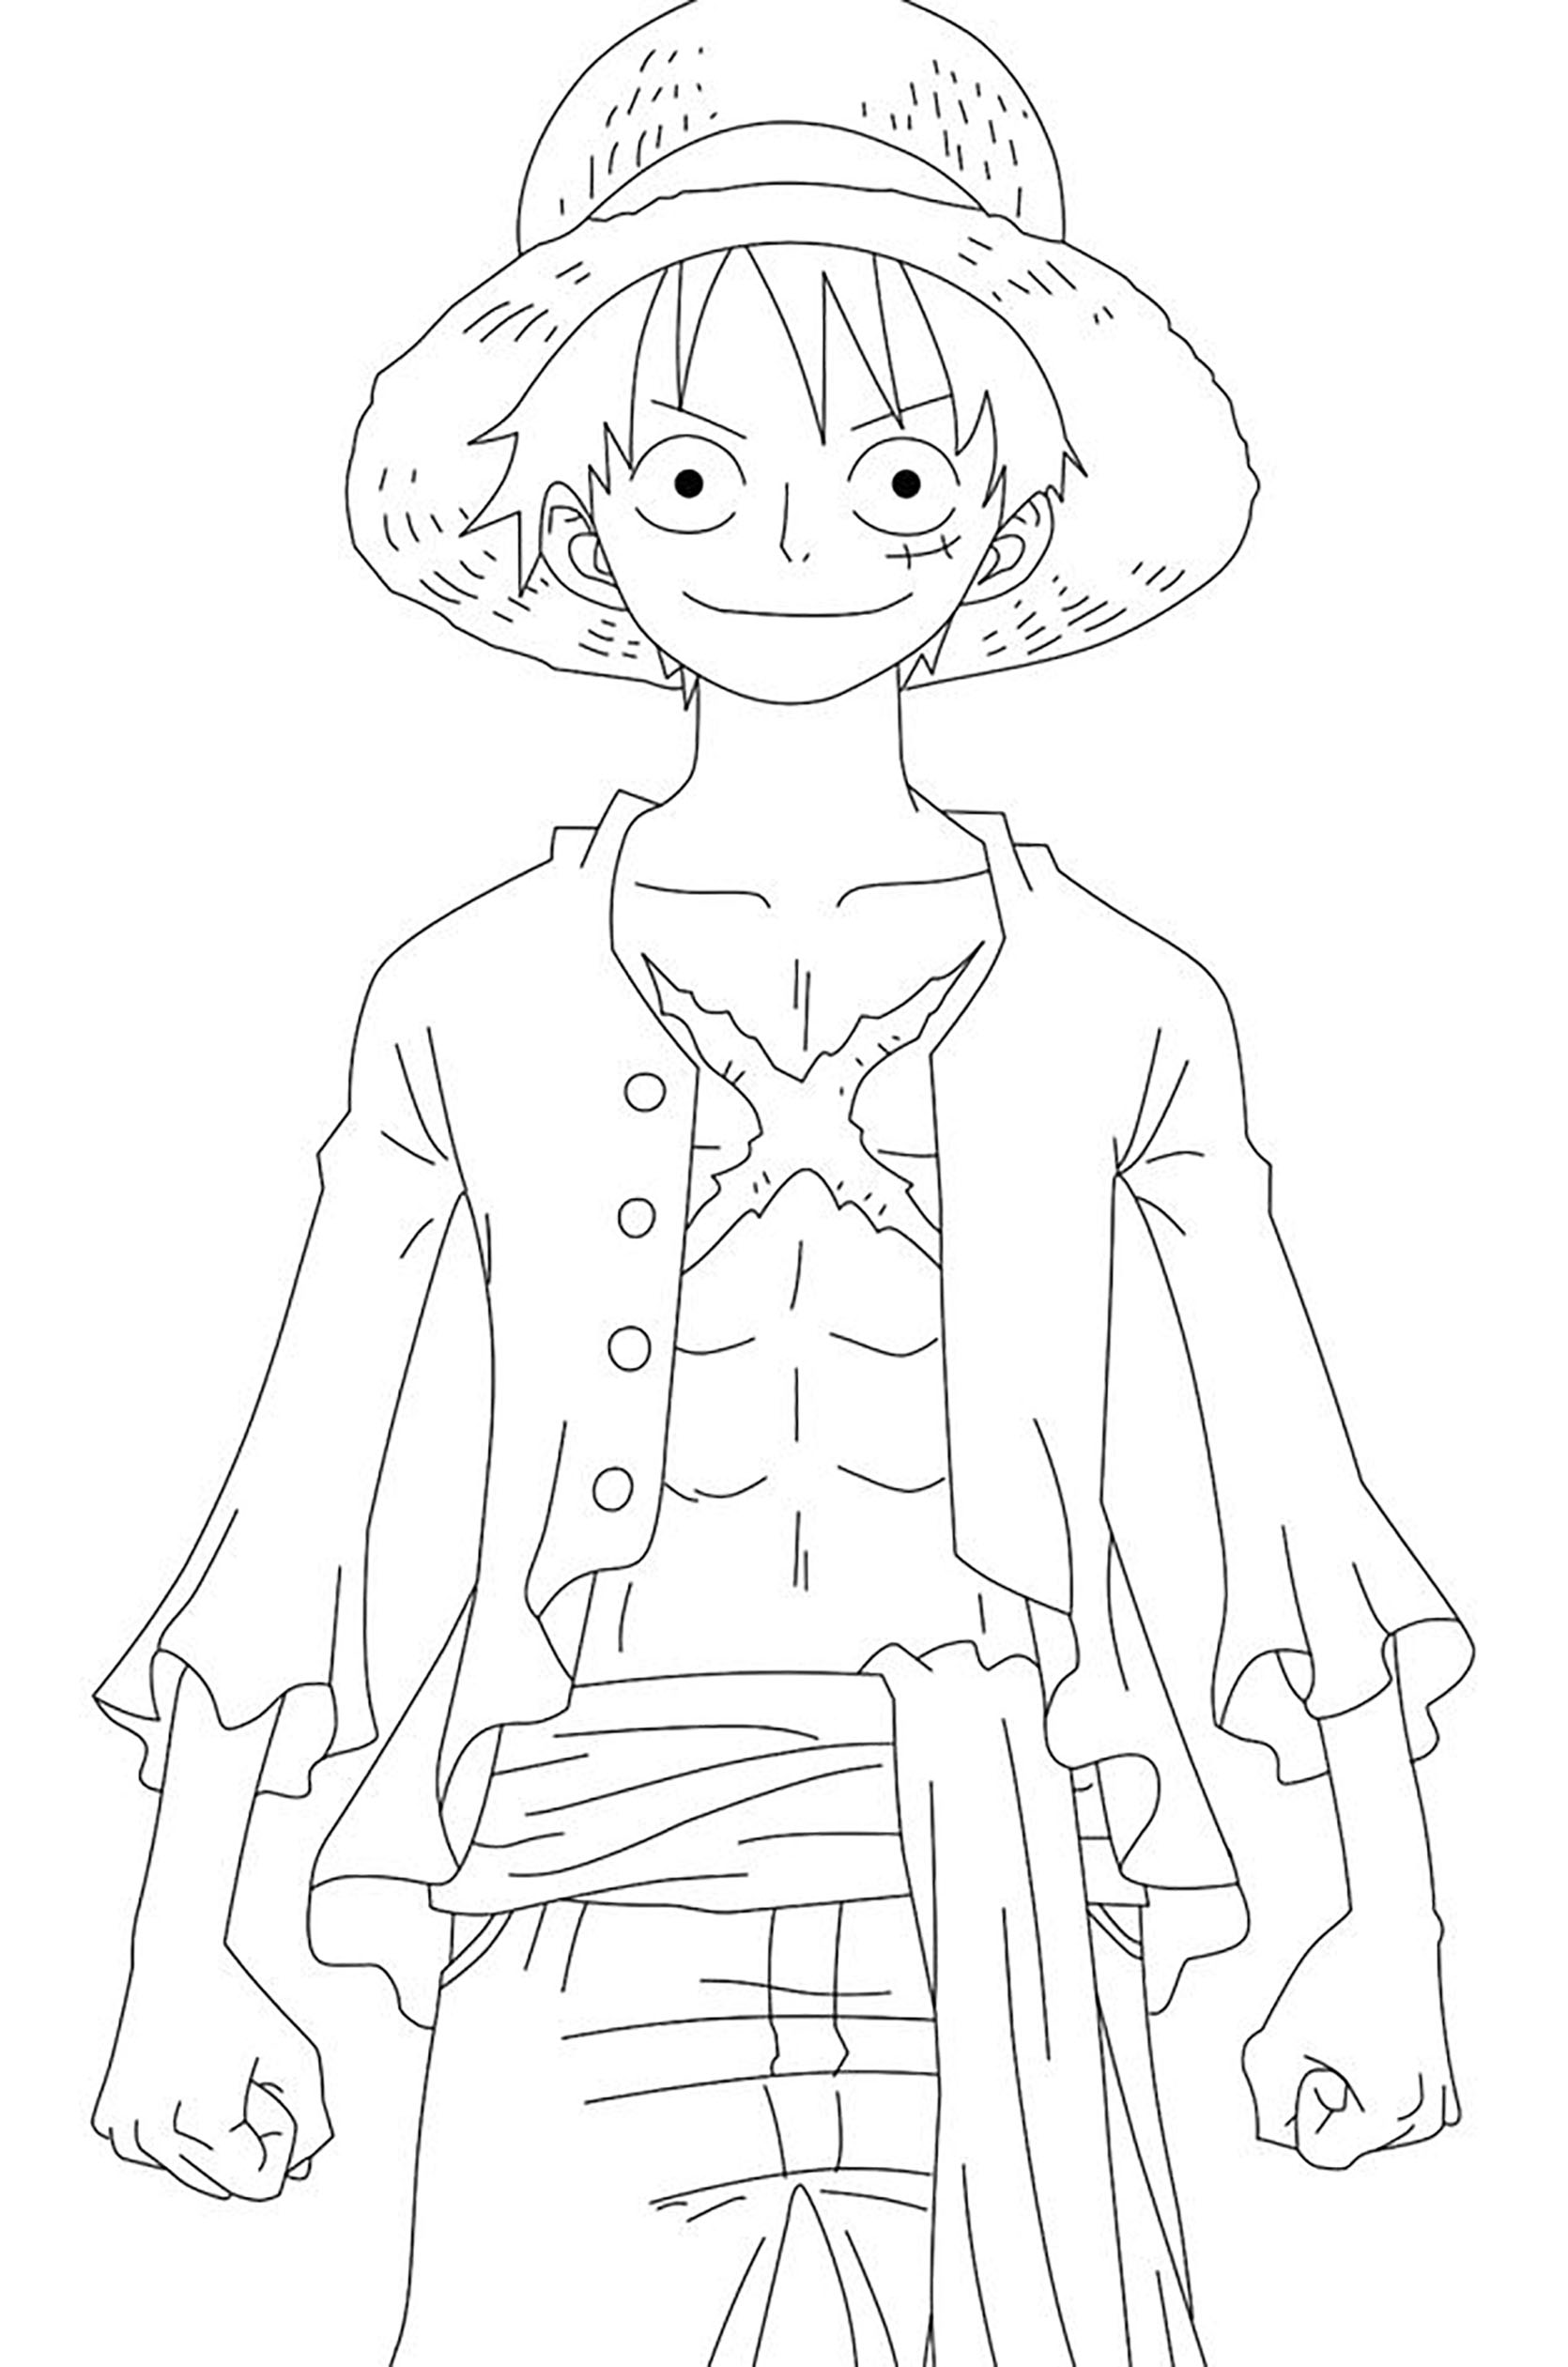 Image of One piece to print and color - One Piece Kids Coloring Pages